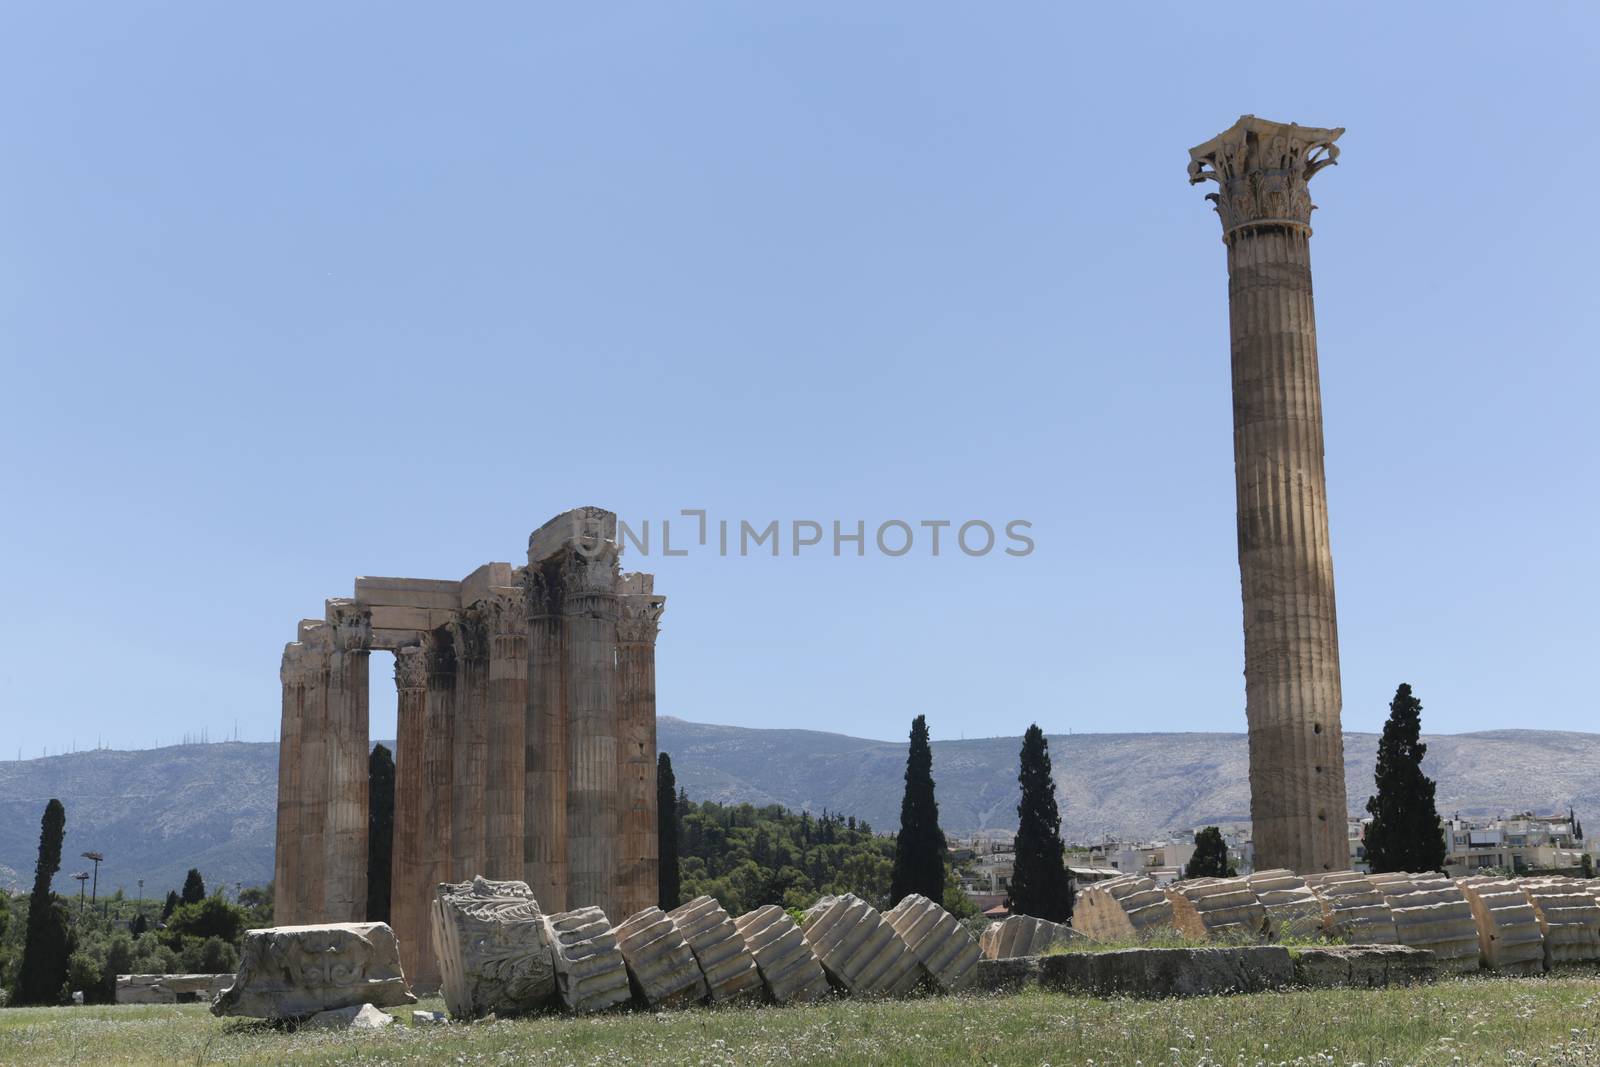 The Temple of Olympian Zeus or the Olympieion